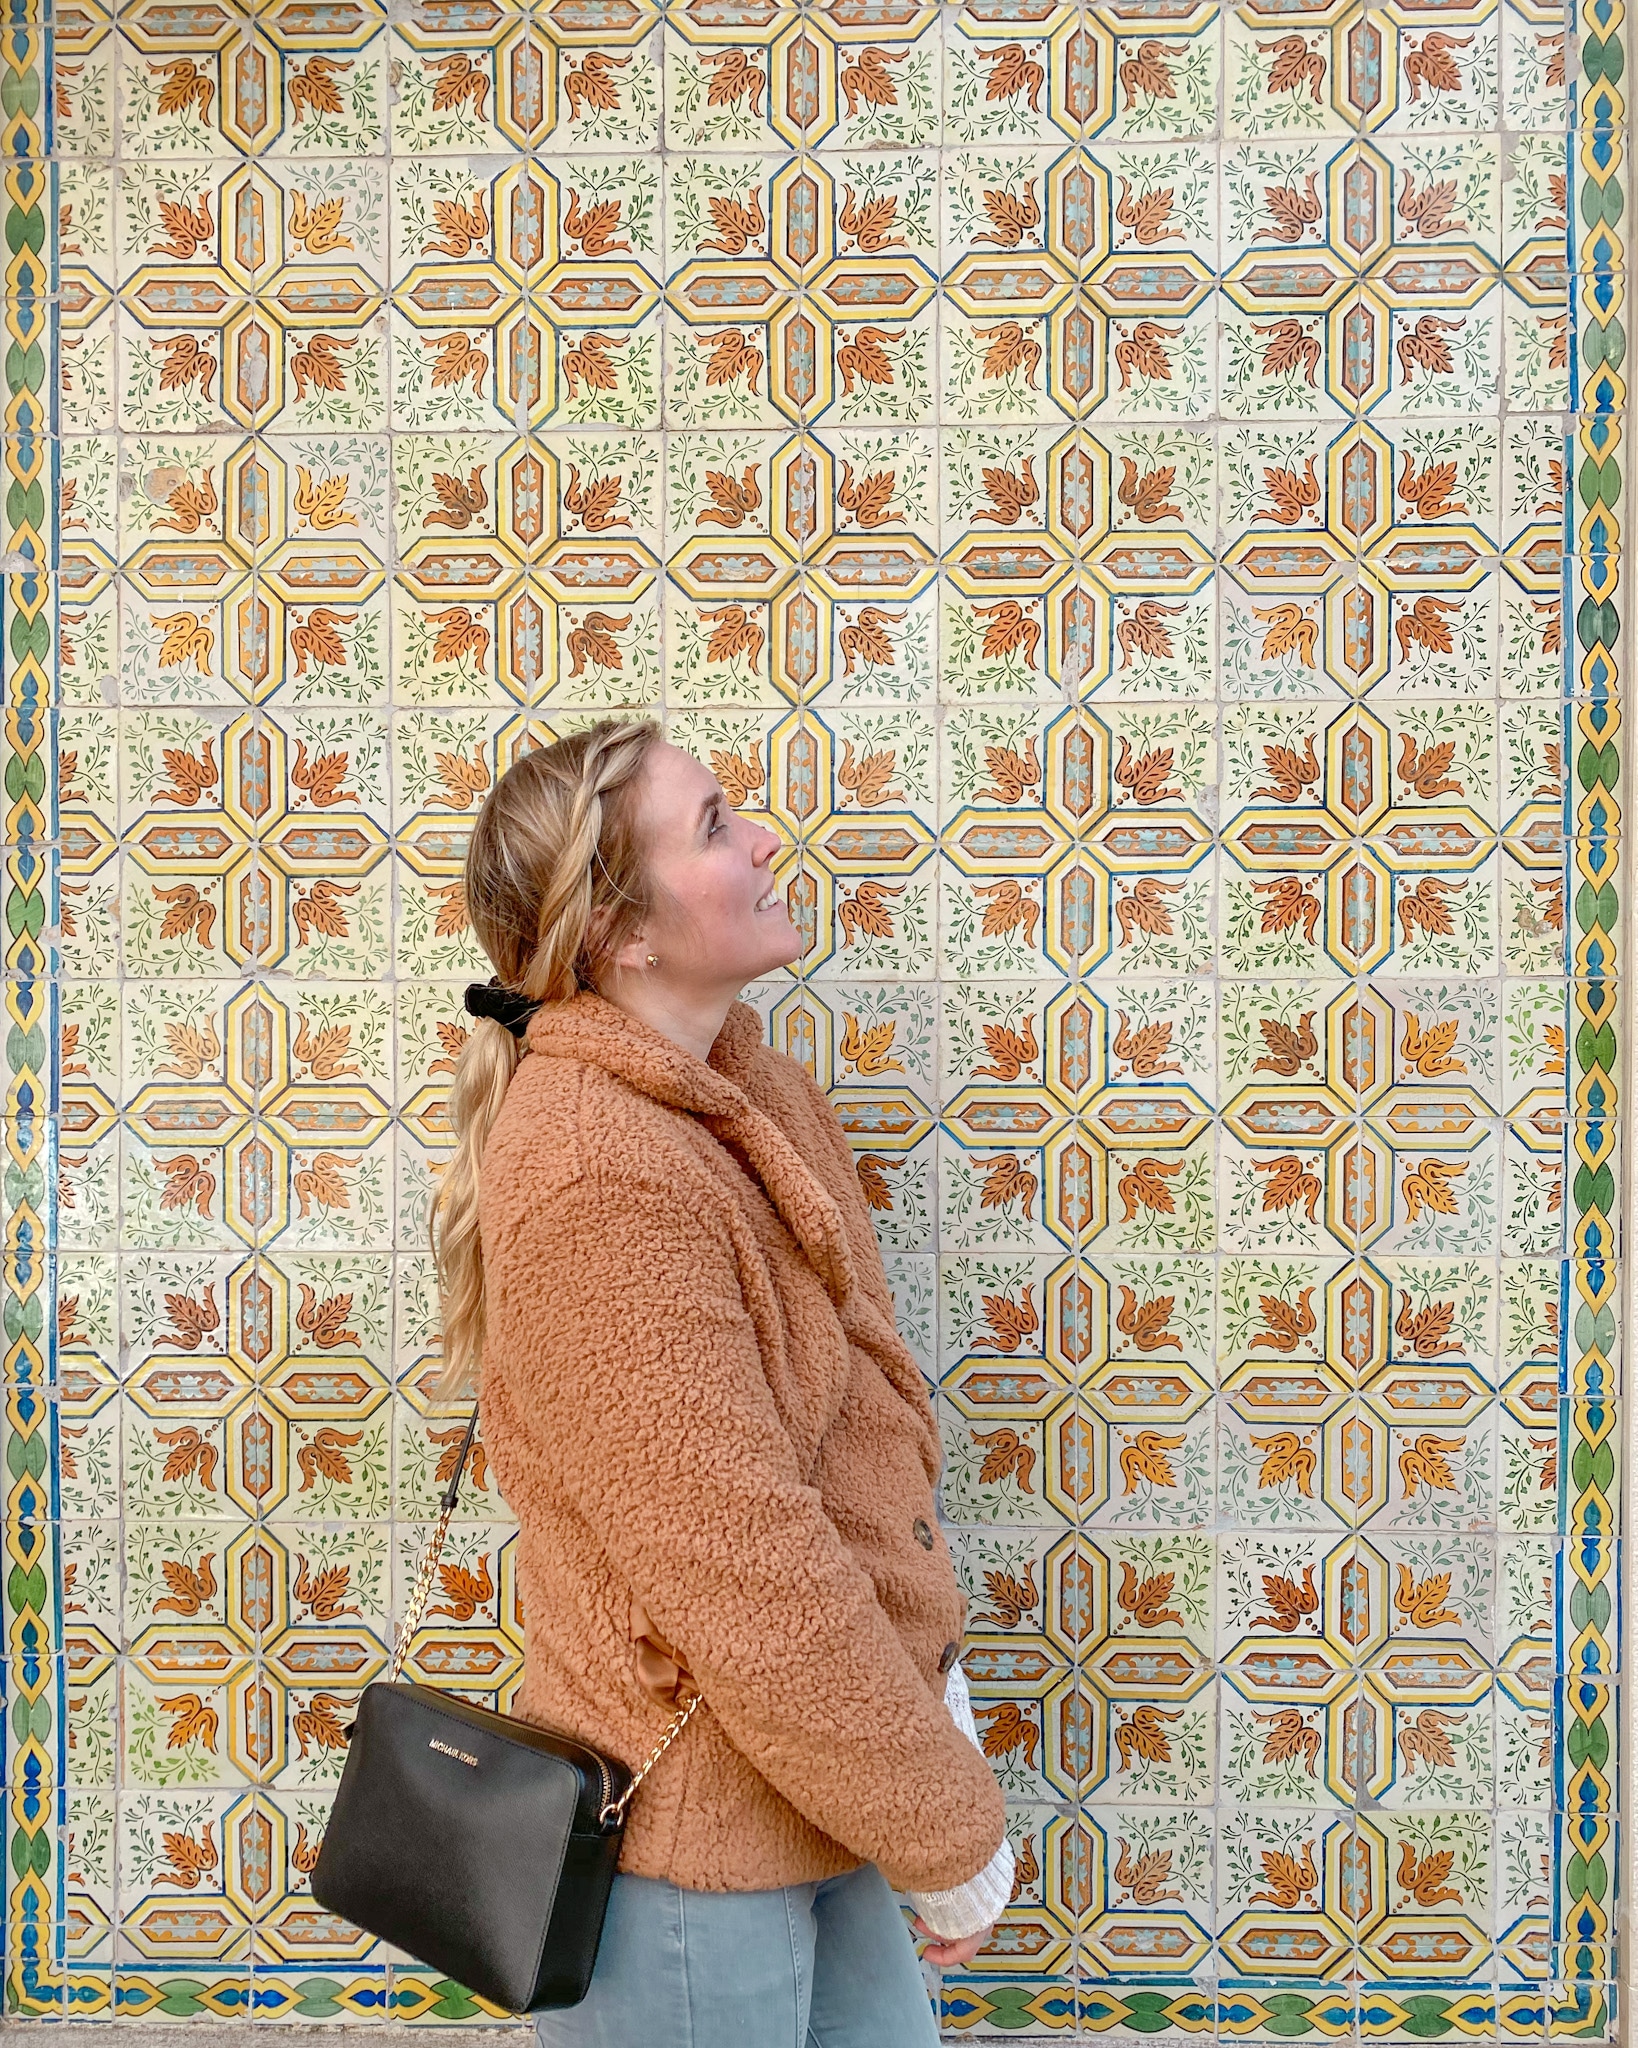 Erinn in front of azulejos (tiles) in Lisbon, Portugal.